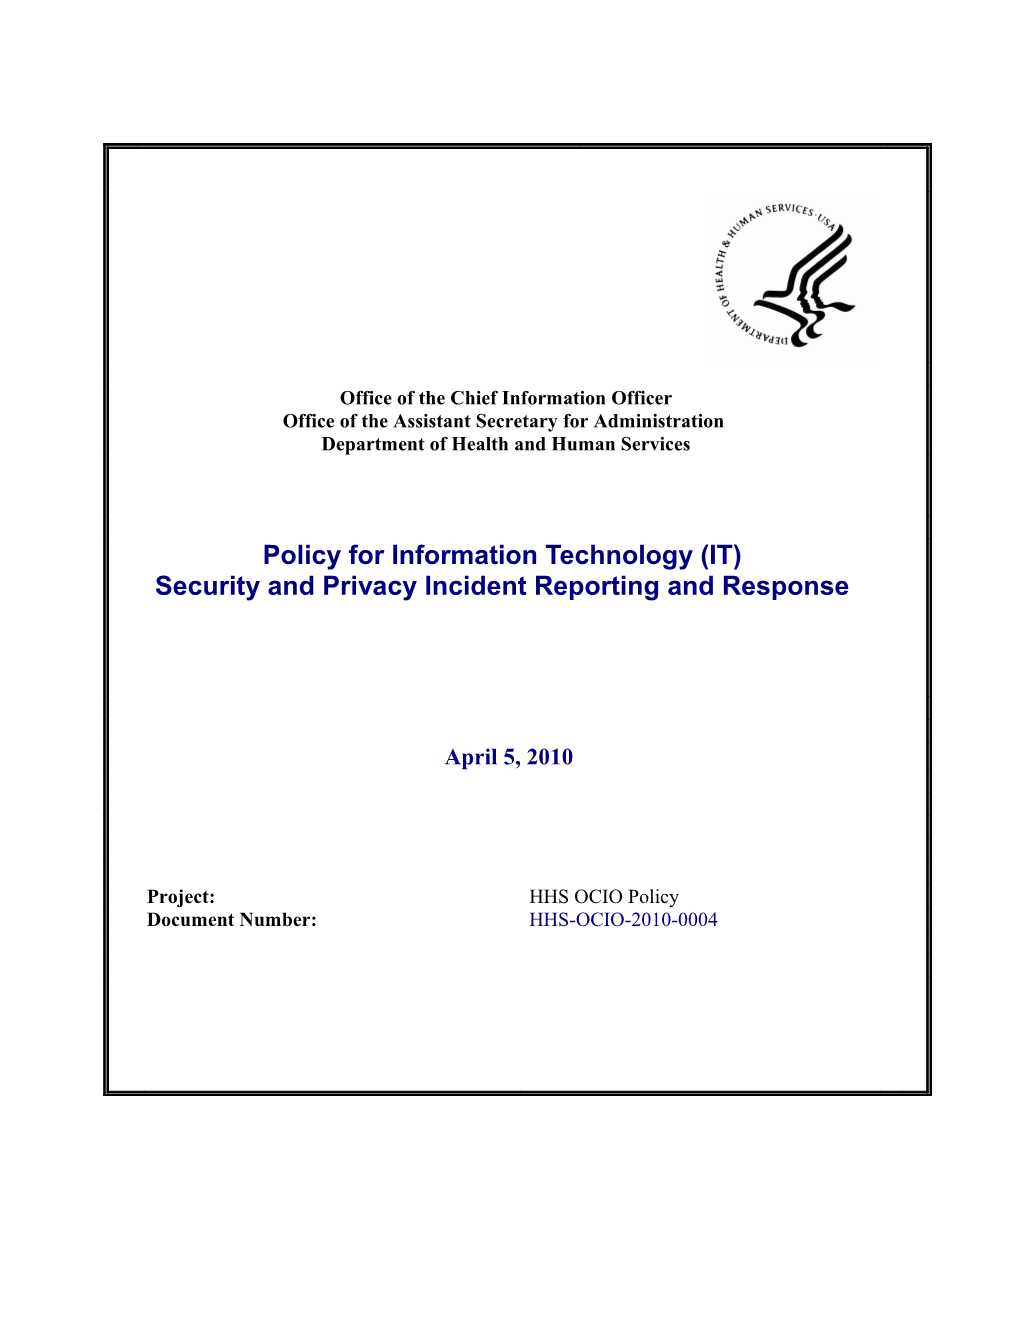 HHS Information Security and Privacy Program Policy